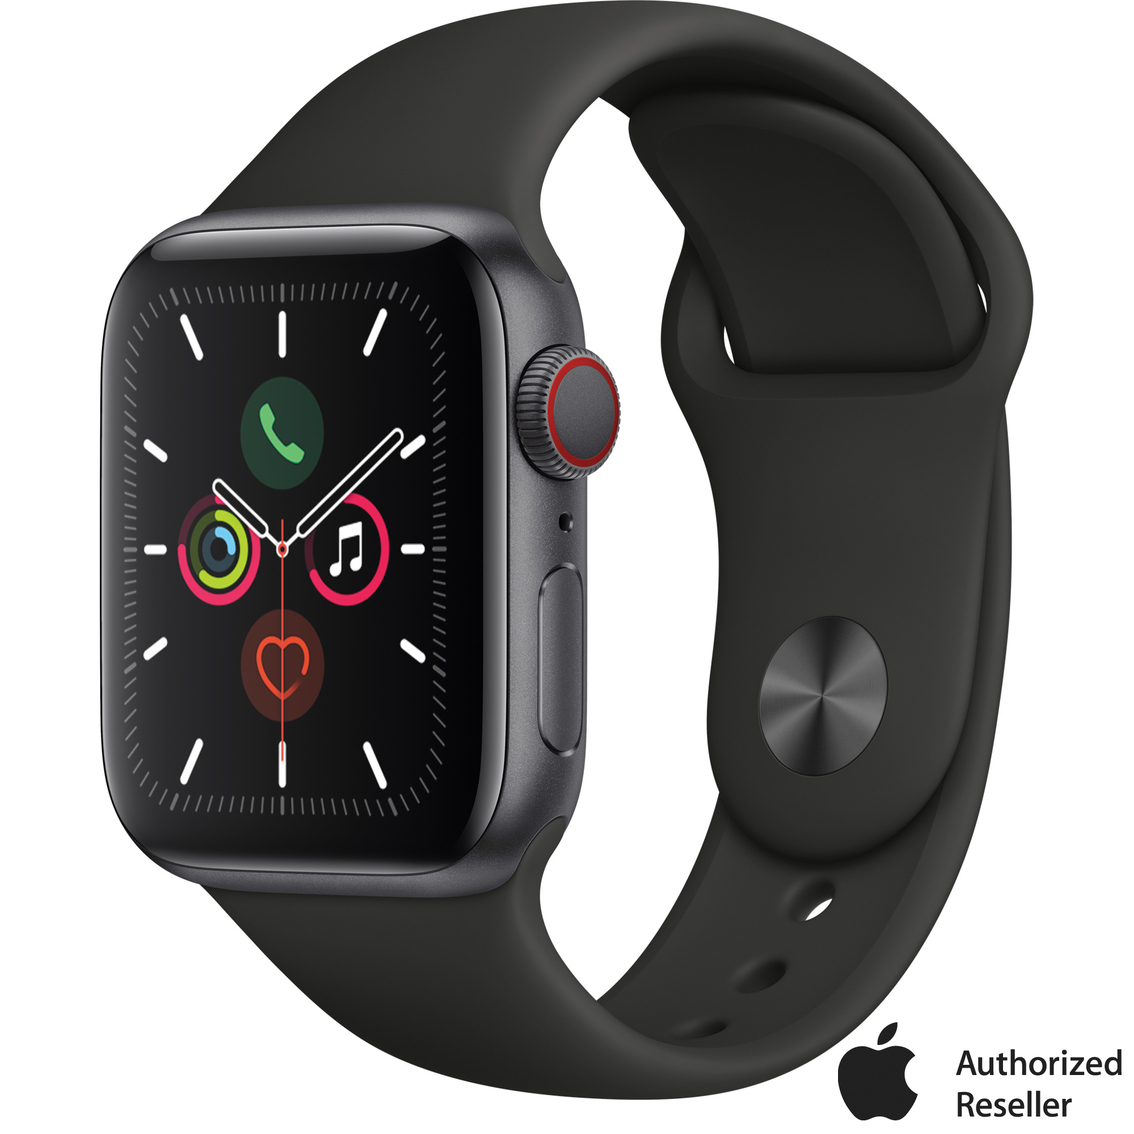 Apple Watch Series 5 GPS + Cellular Space Gray Aluminum Case with Black Sport Band - Image 2 of 2